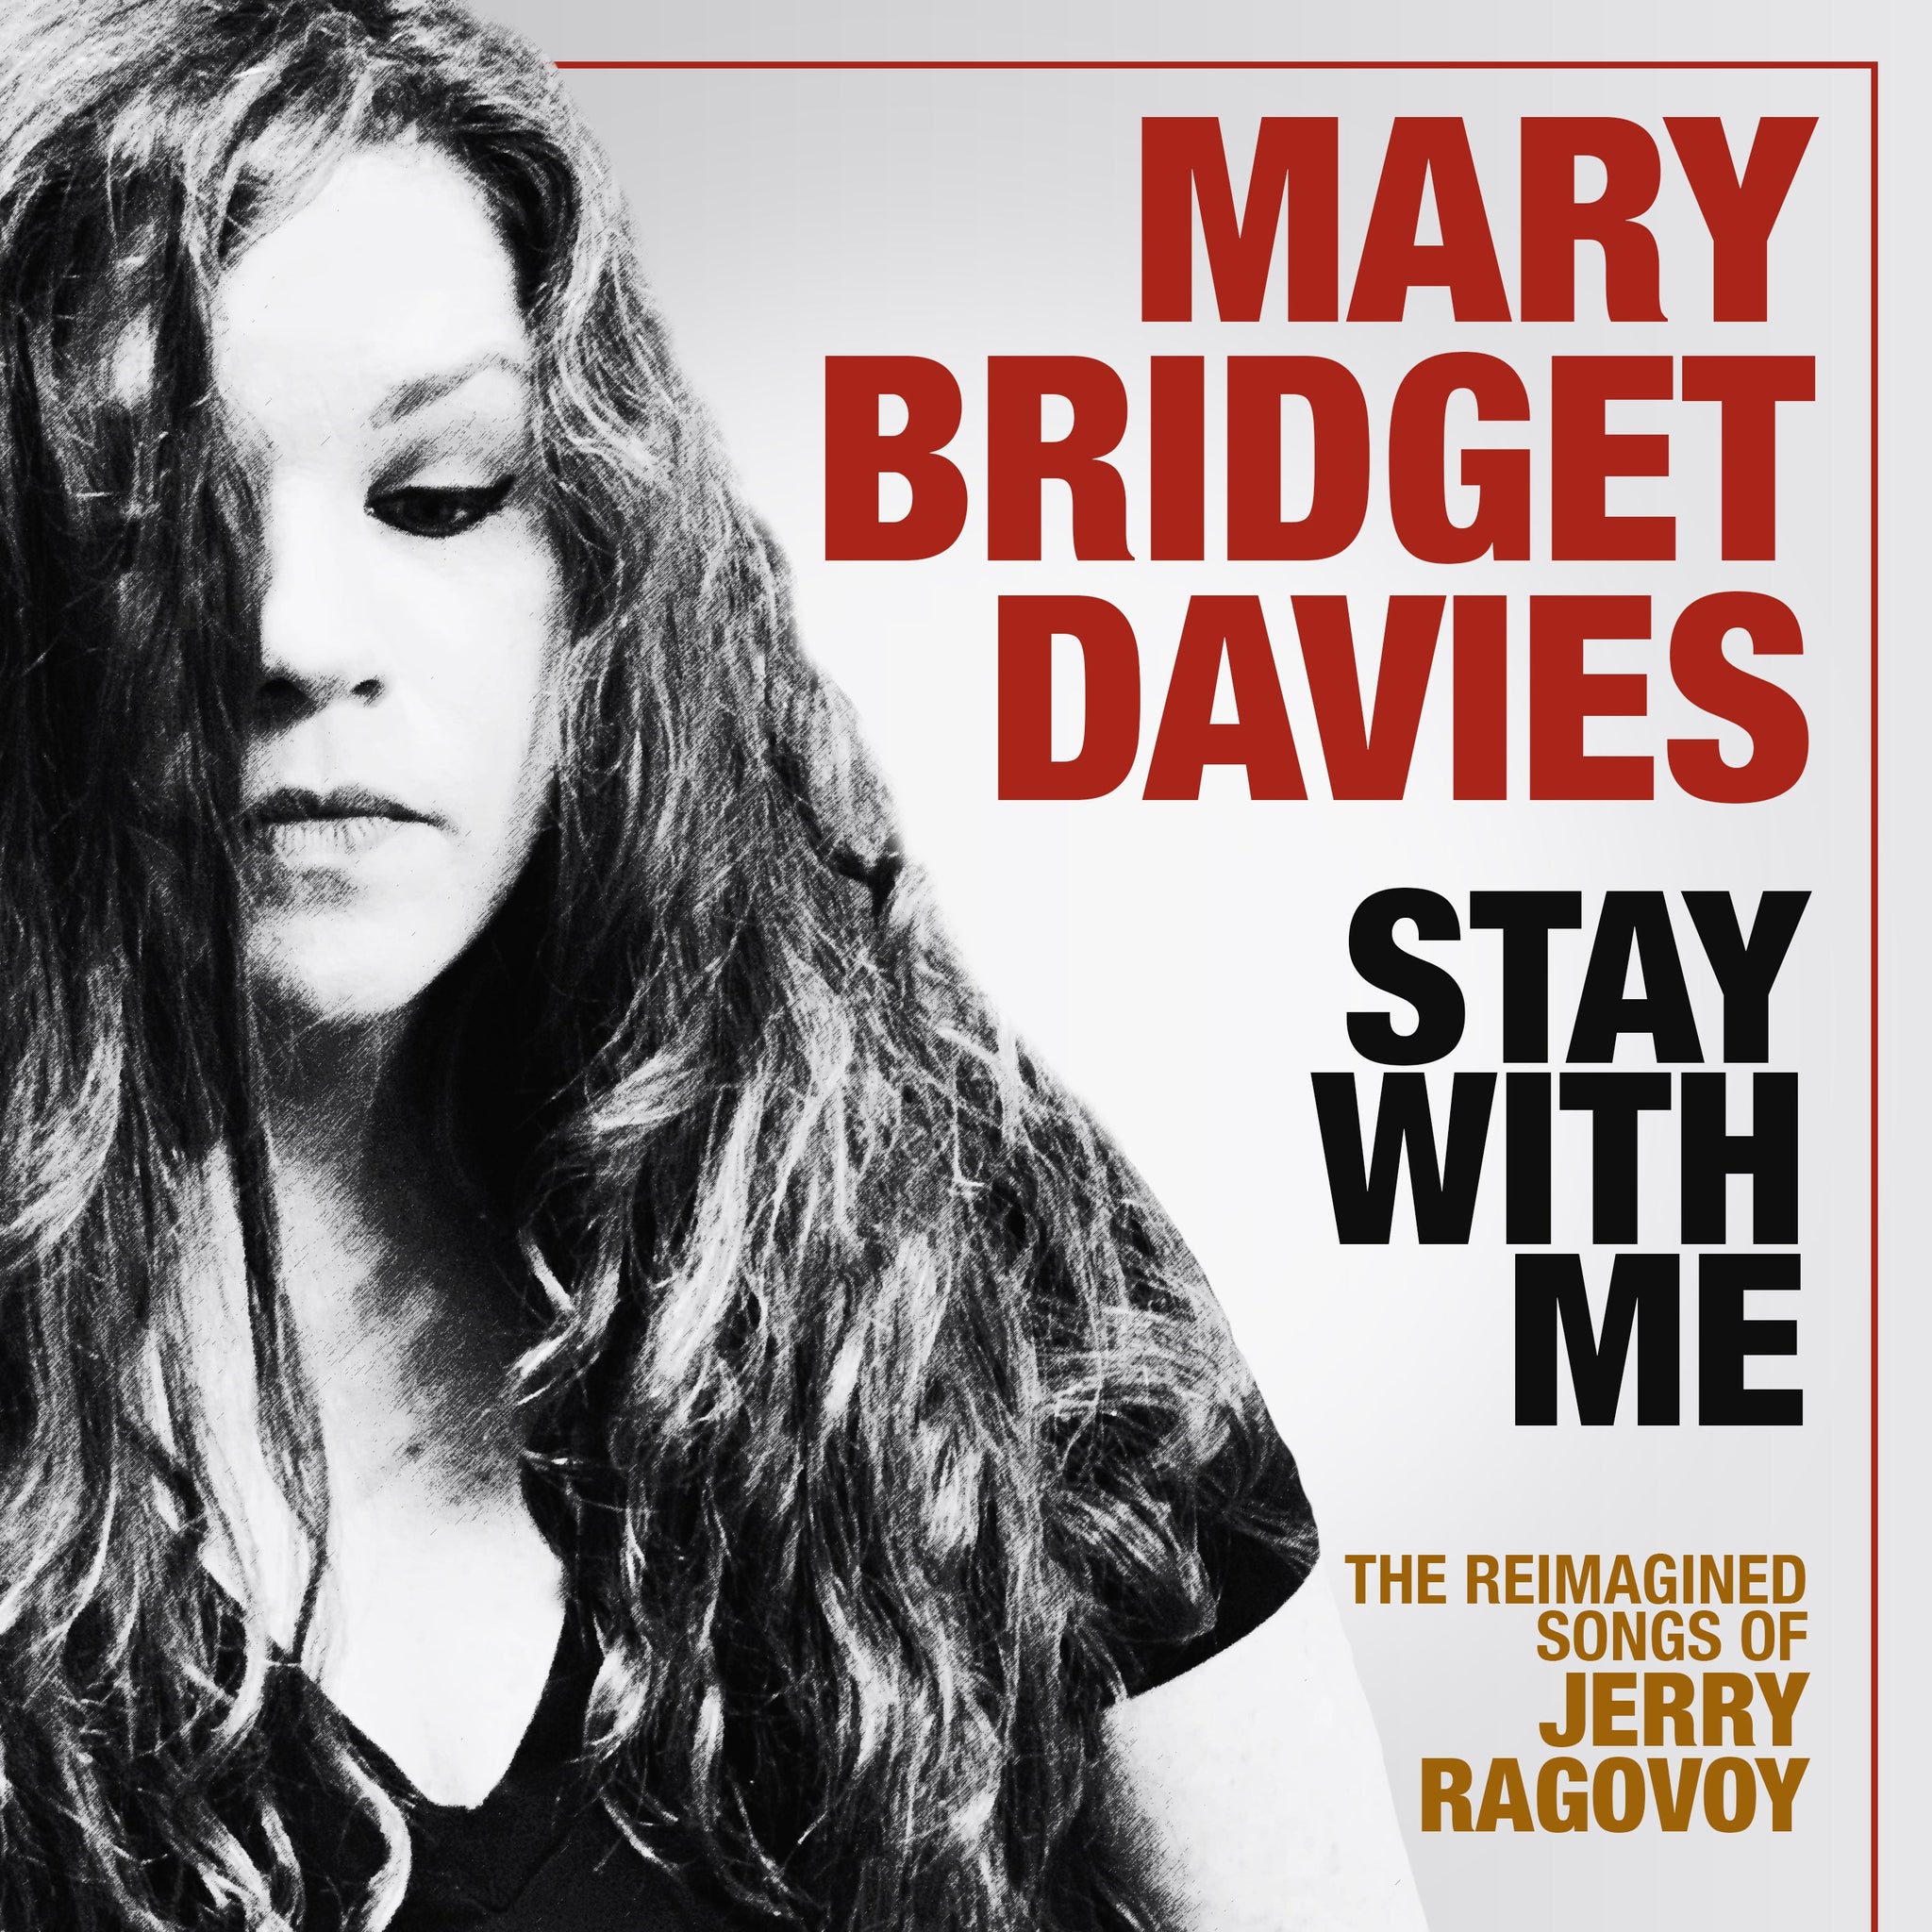 Mary Bridget Davies: Stay With Me - The Reimagined Songs of Jerry Ragovoy [MP3]